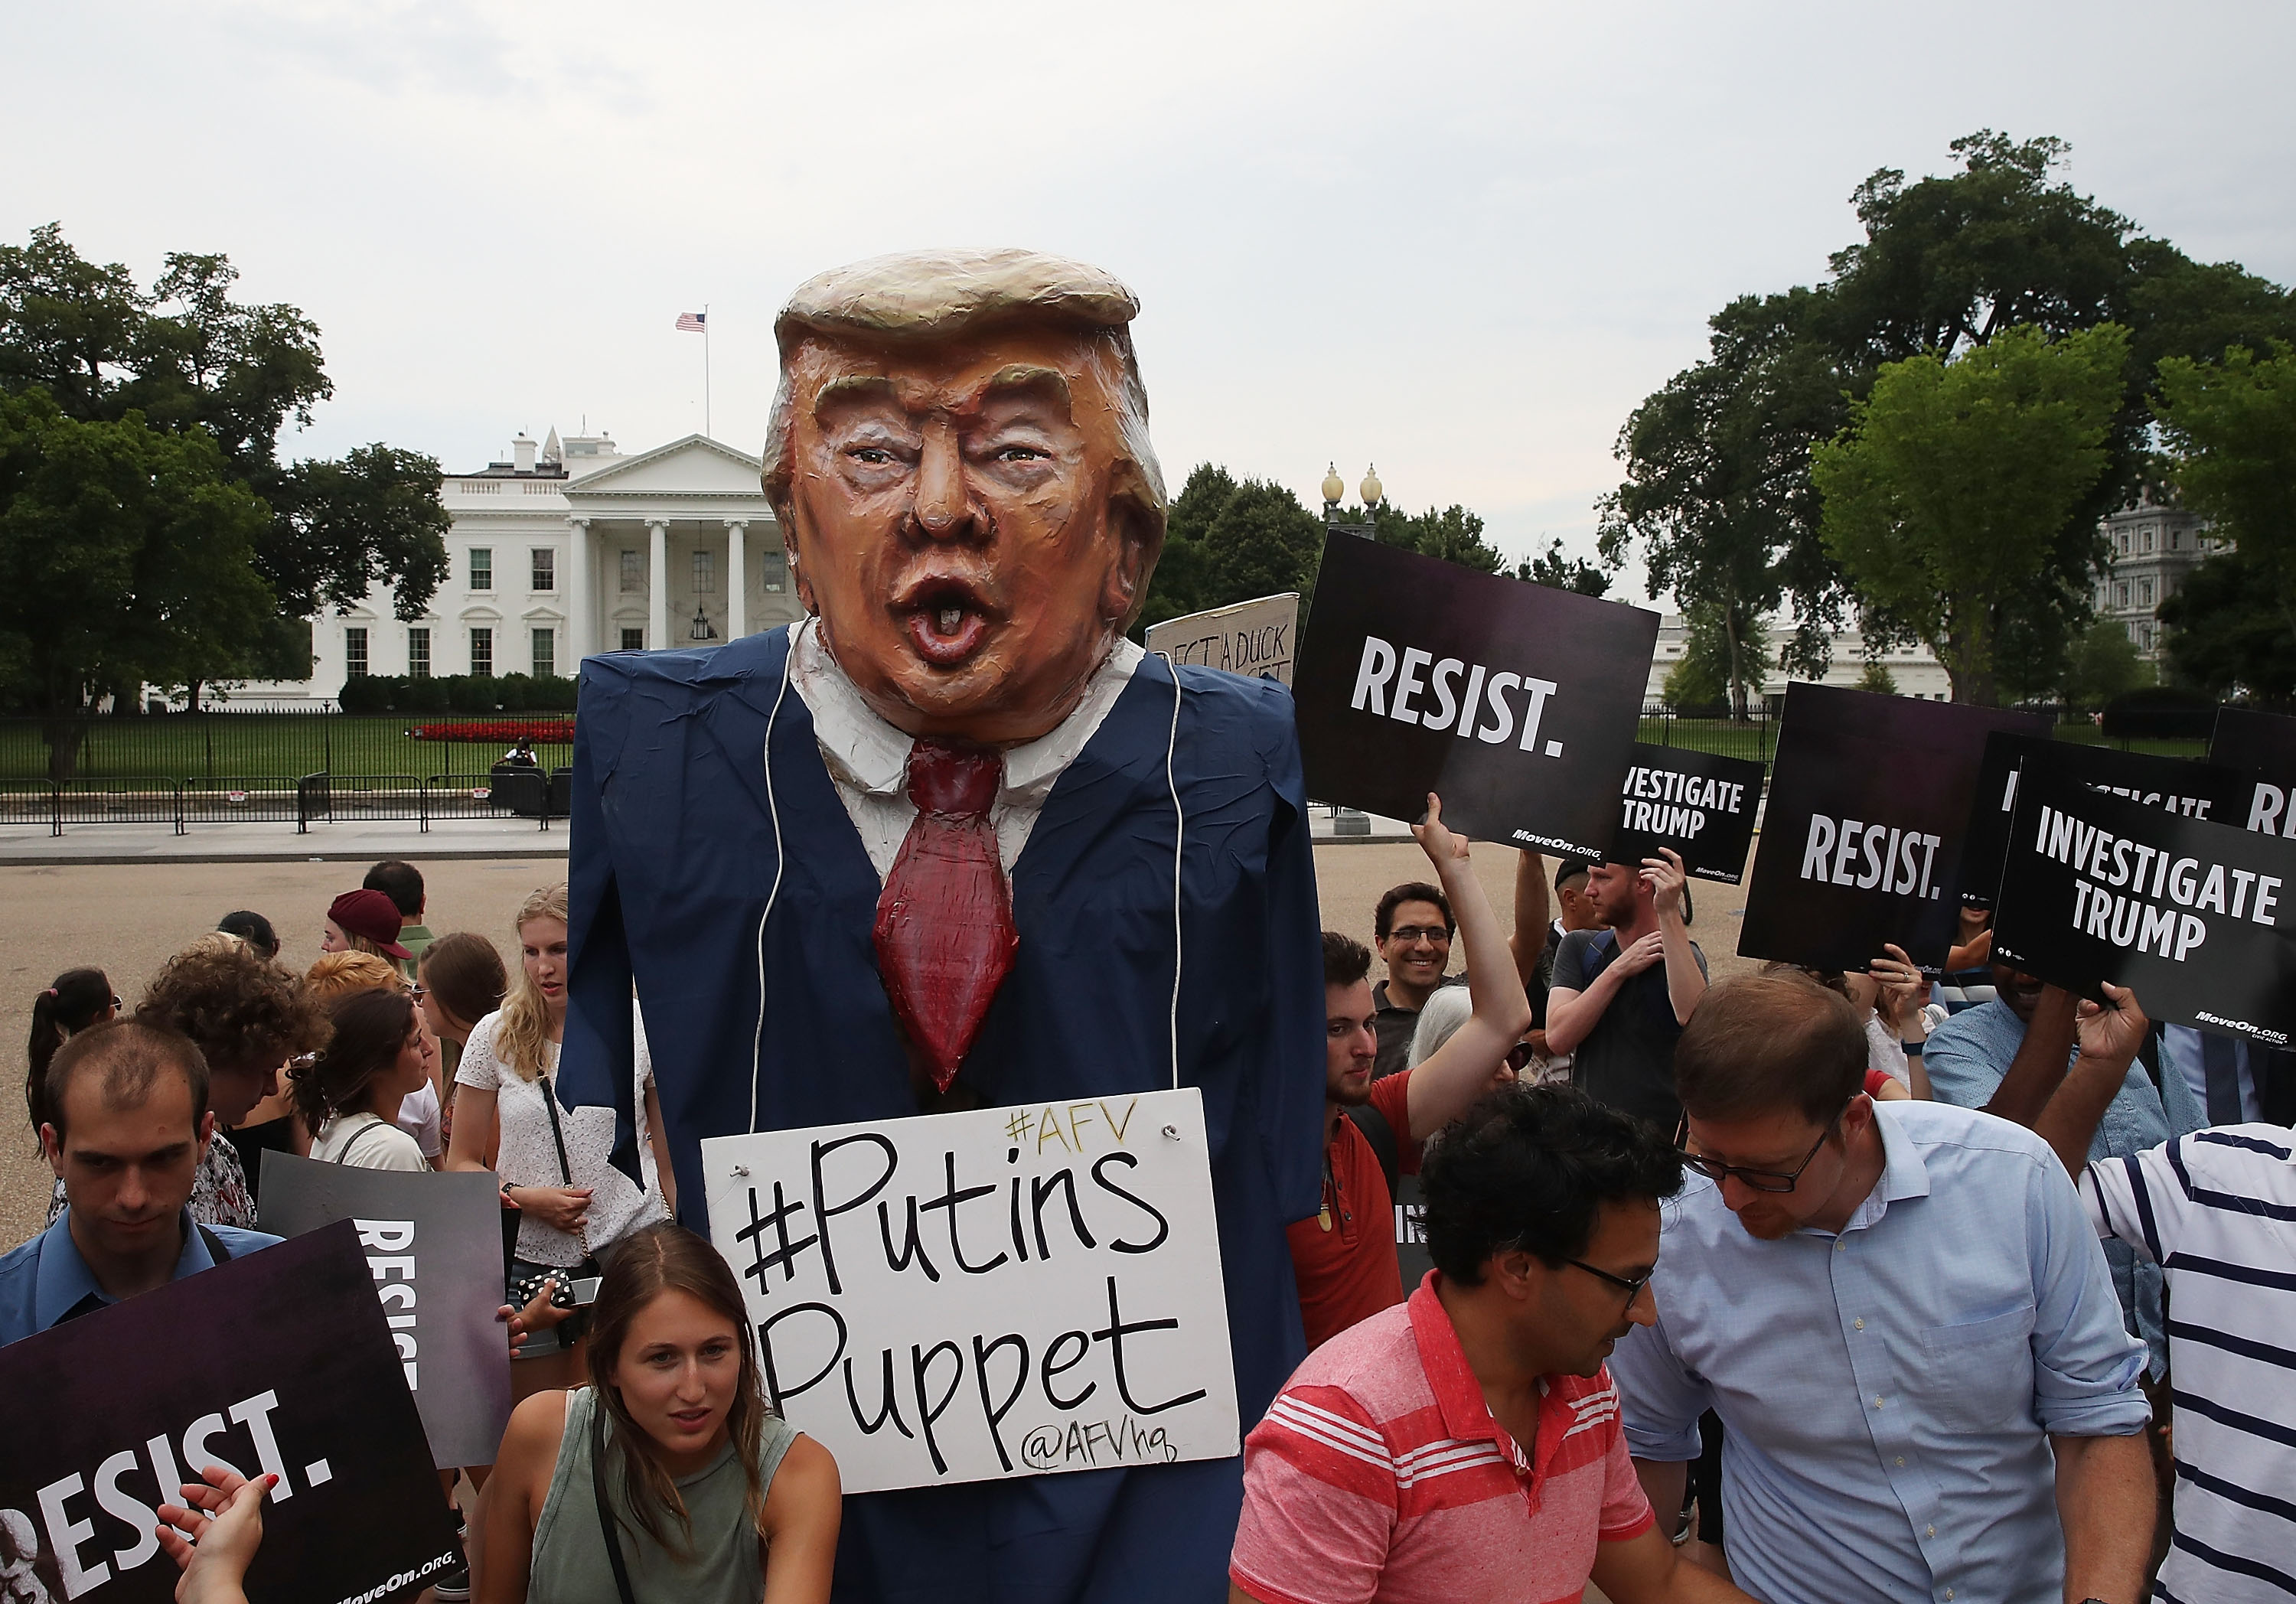 People protest against U.S. President Donald Trump in front of the White House on July 11, 2017 in Washington, DC. (Mark Wilson—Getty Images)